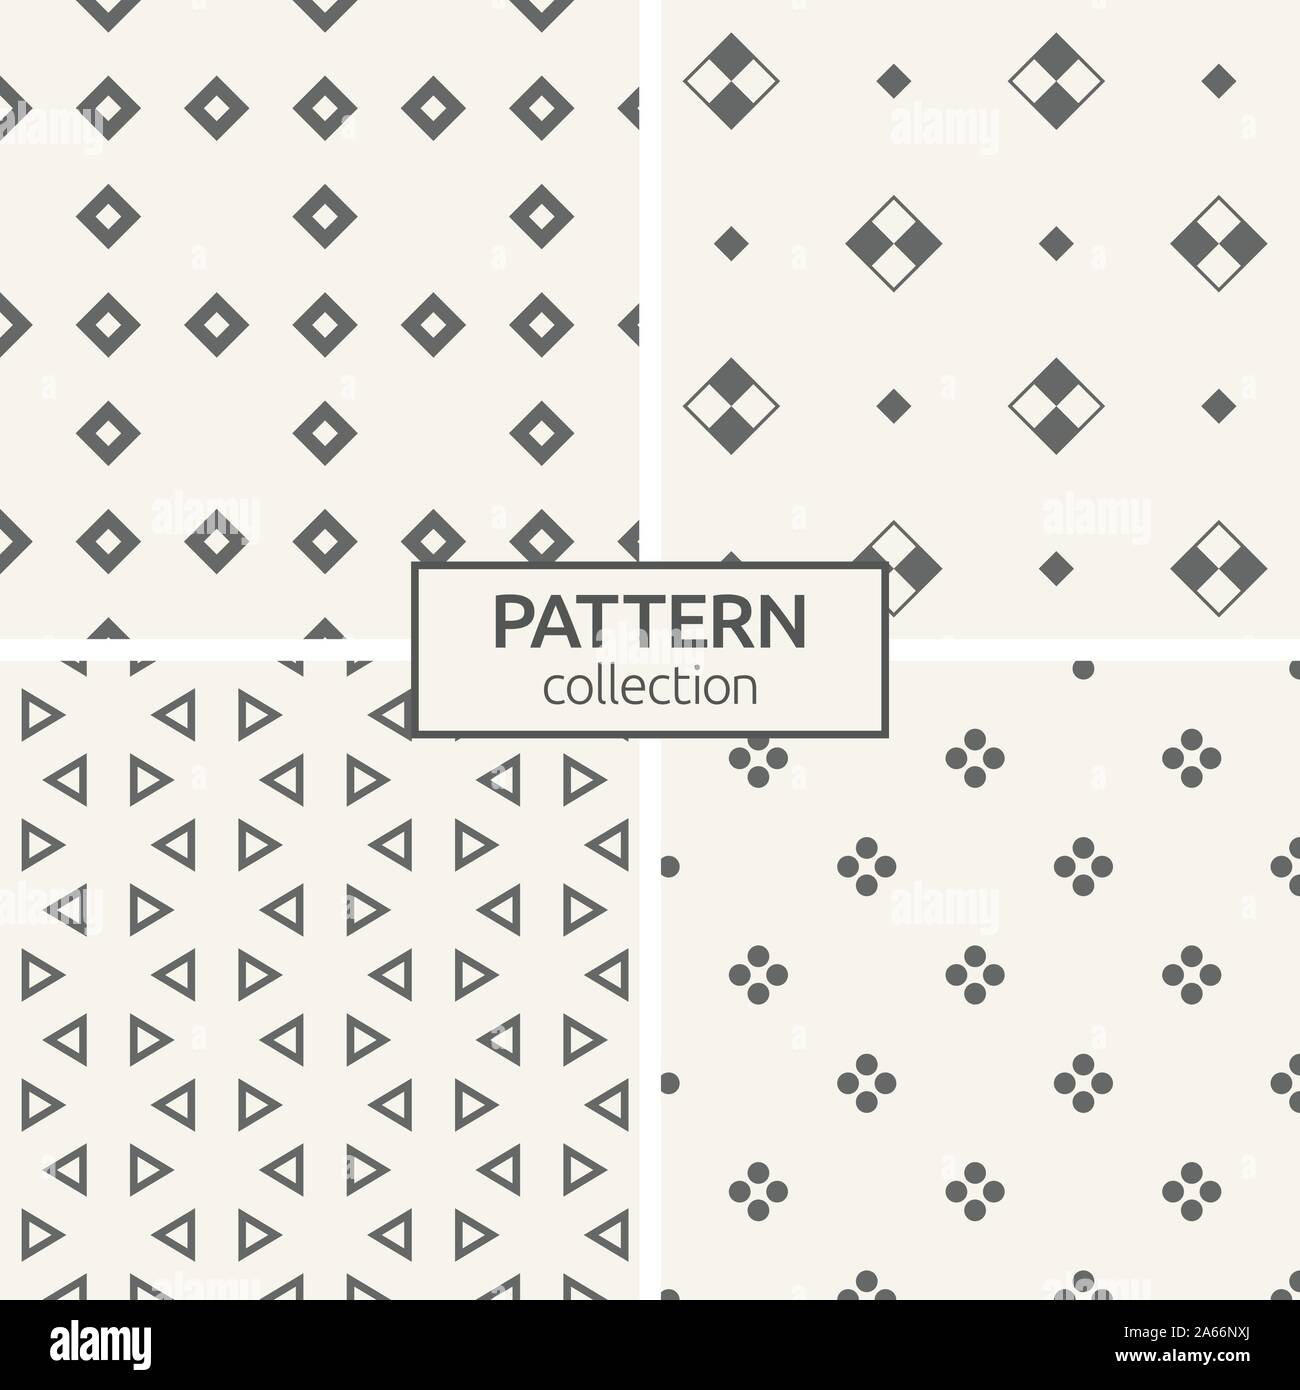 Set of four seamless patterns. Abstract geometric trendy vector backgrounds. Modern stylish textures of small triangles, rhombuses, groups of dots. Stock Vector